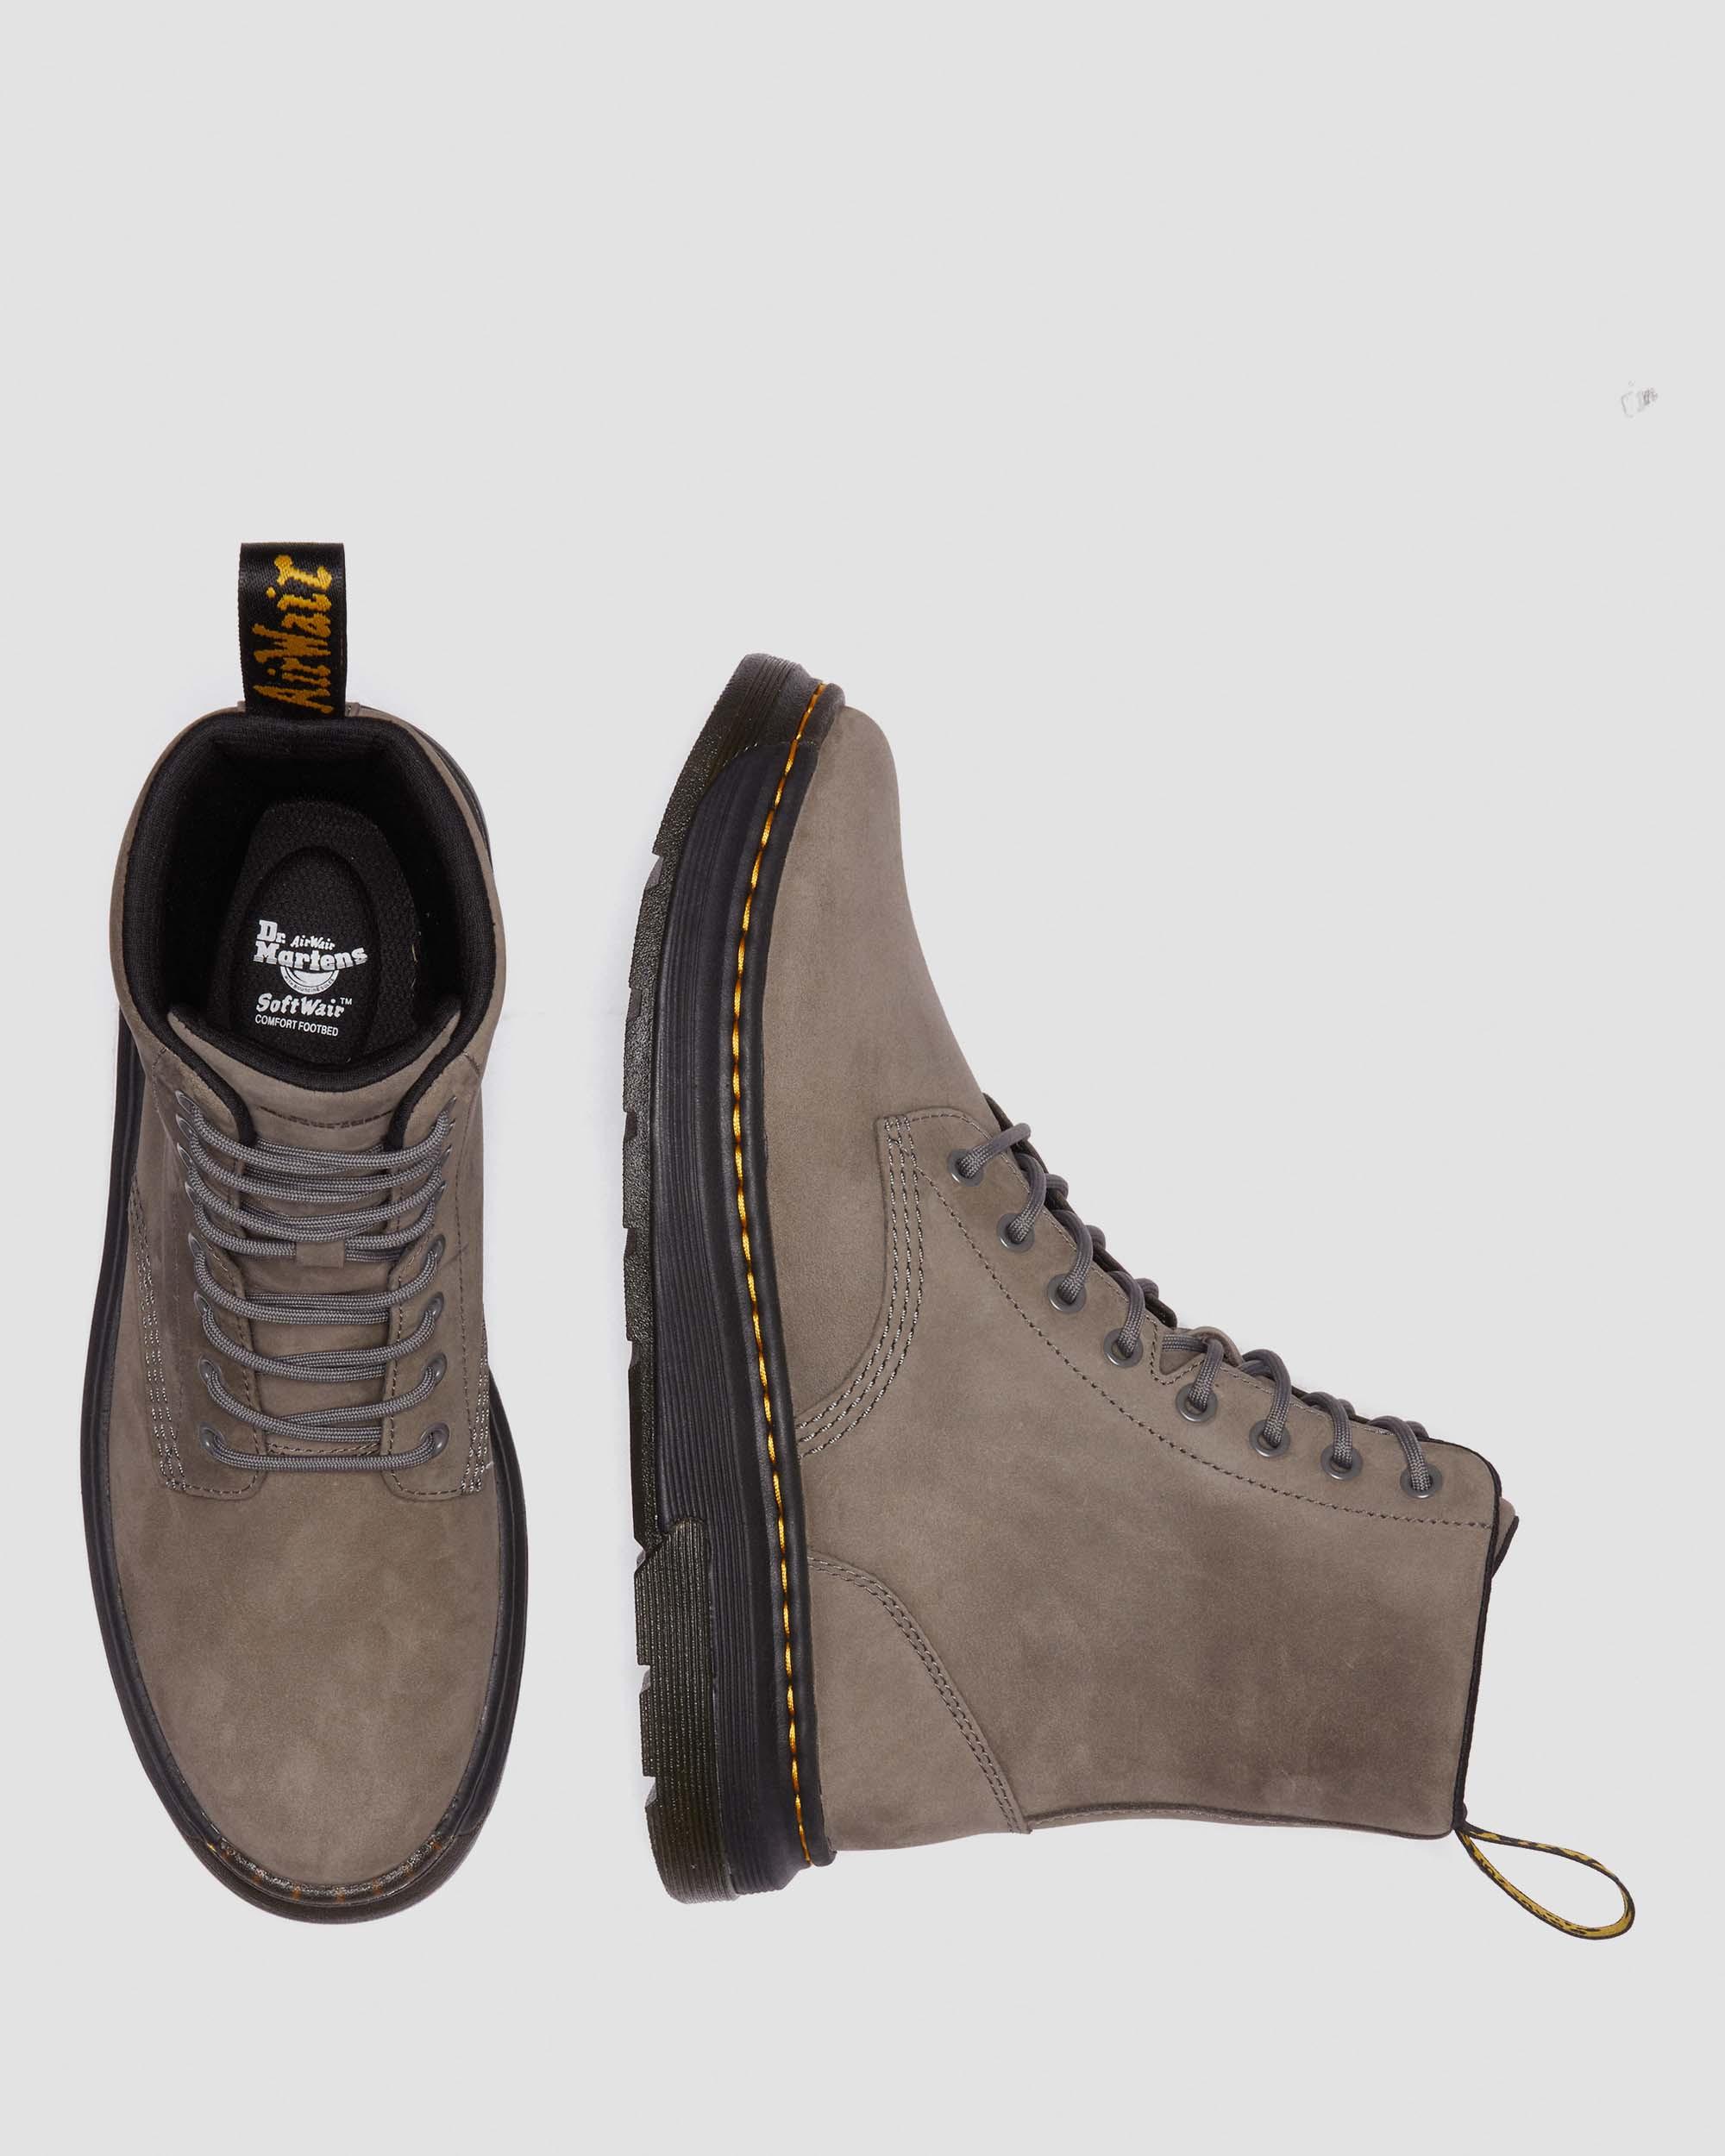 DR MARTENS Crewson Nubuck Leather Everyday Boots